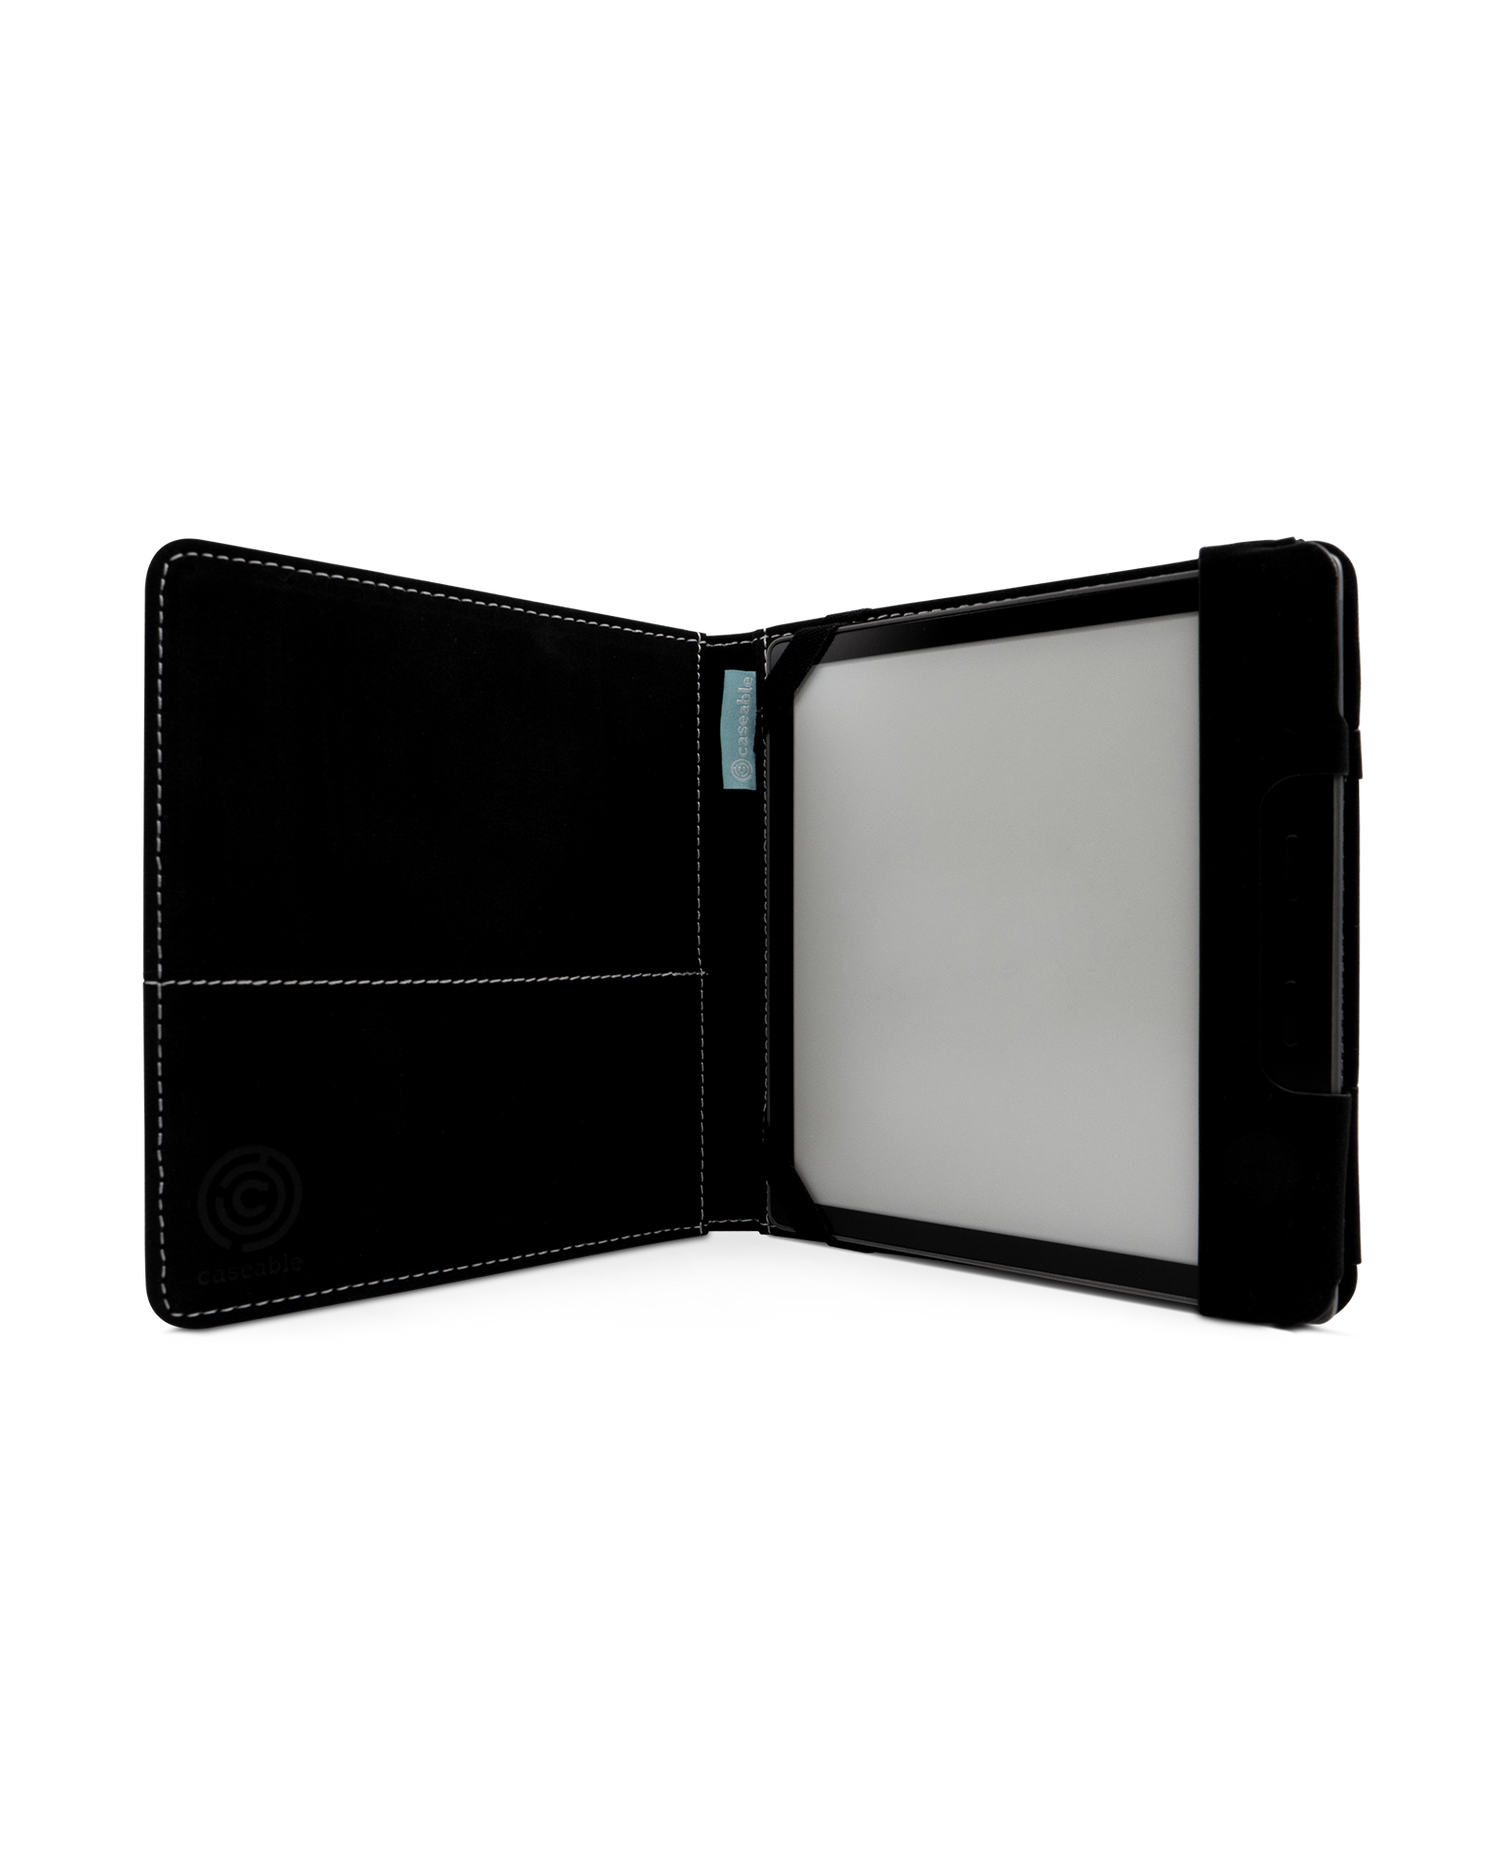 Green Marble eReader Case for tolino vision 6: Opened interior view